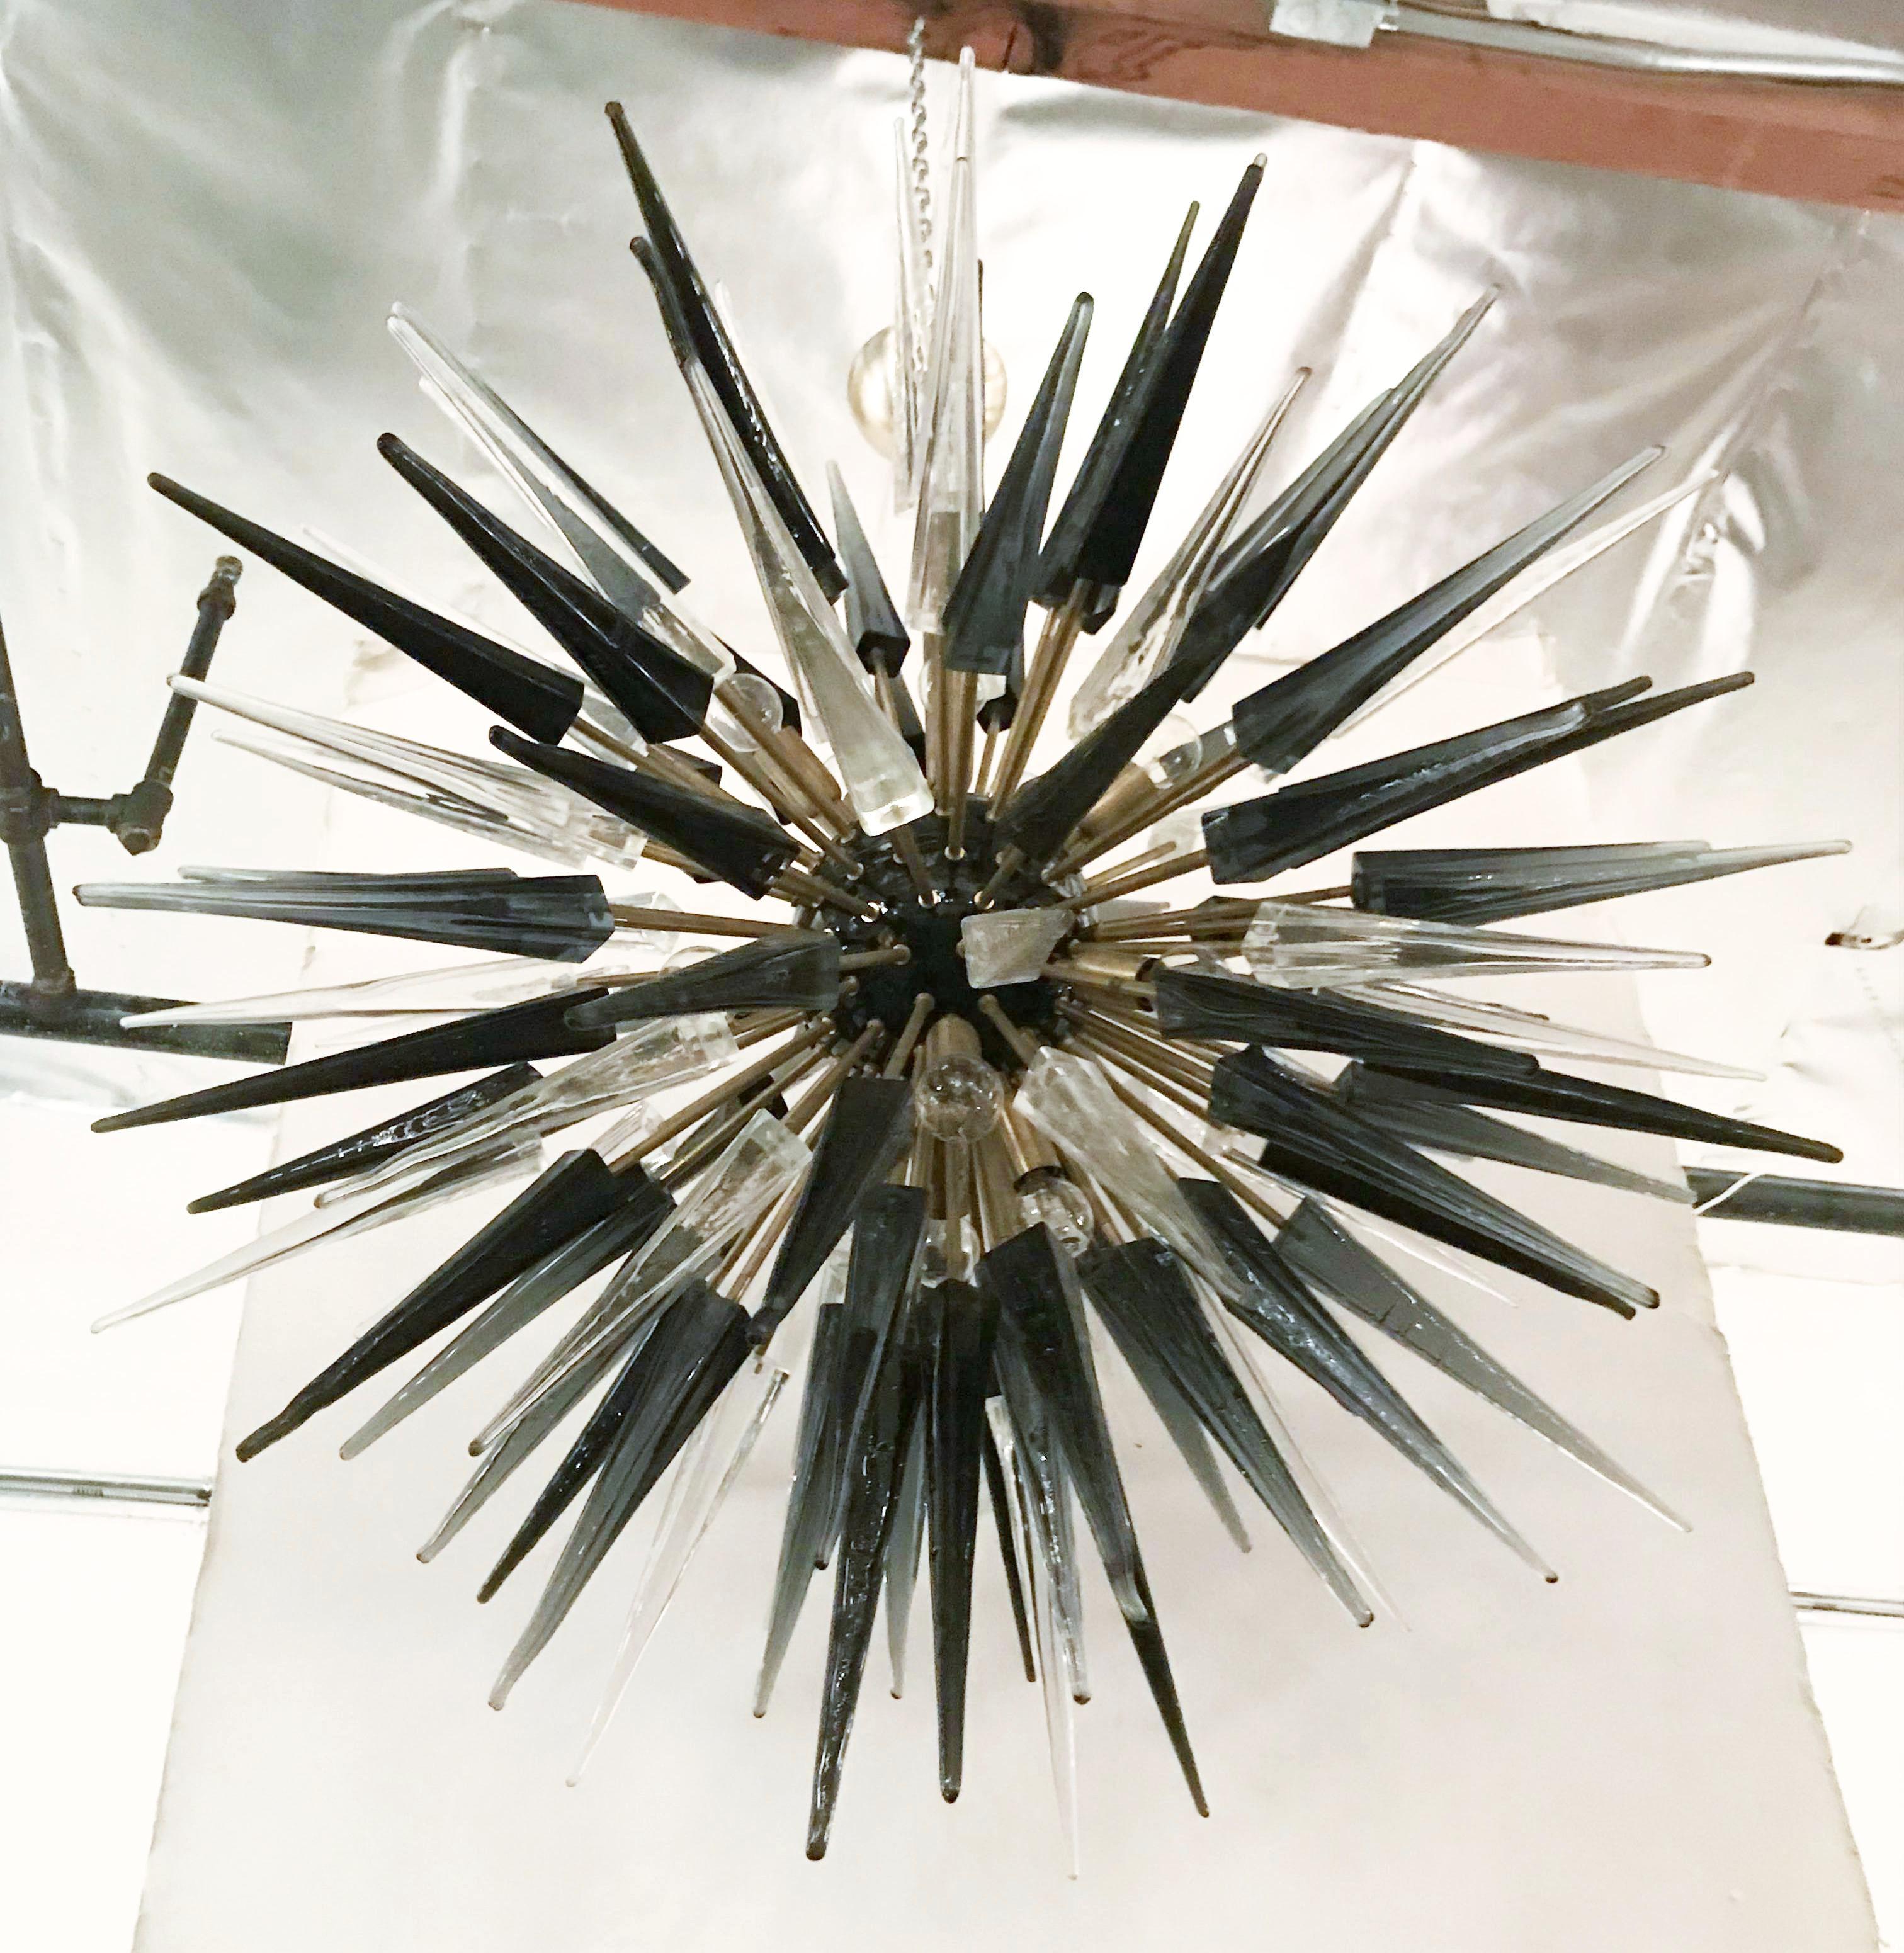 Italian Sputnik chandelier with clear, smoky and black Murano glass shards on bronzed brass metal frame and enamled black center / Designed by Fabio Bergomi for Fabio Ltd / Made in Italy
12 lights / E14 type / max 40W each
Diameter: 42 inches /